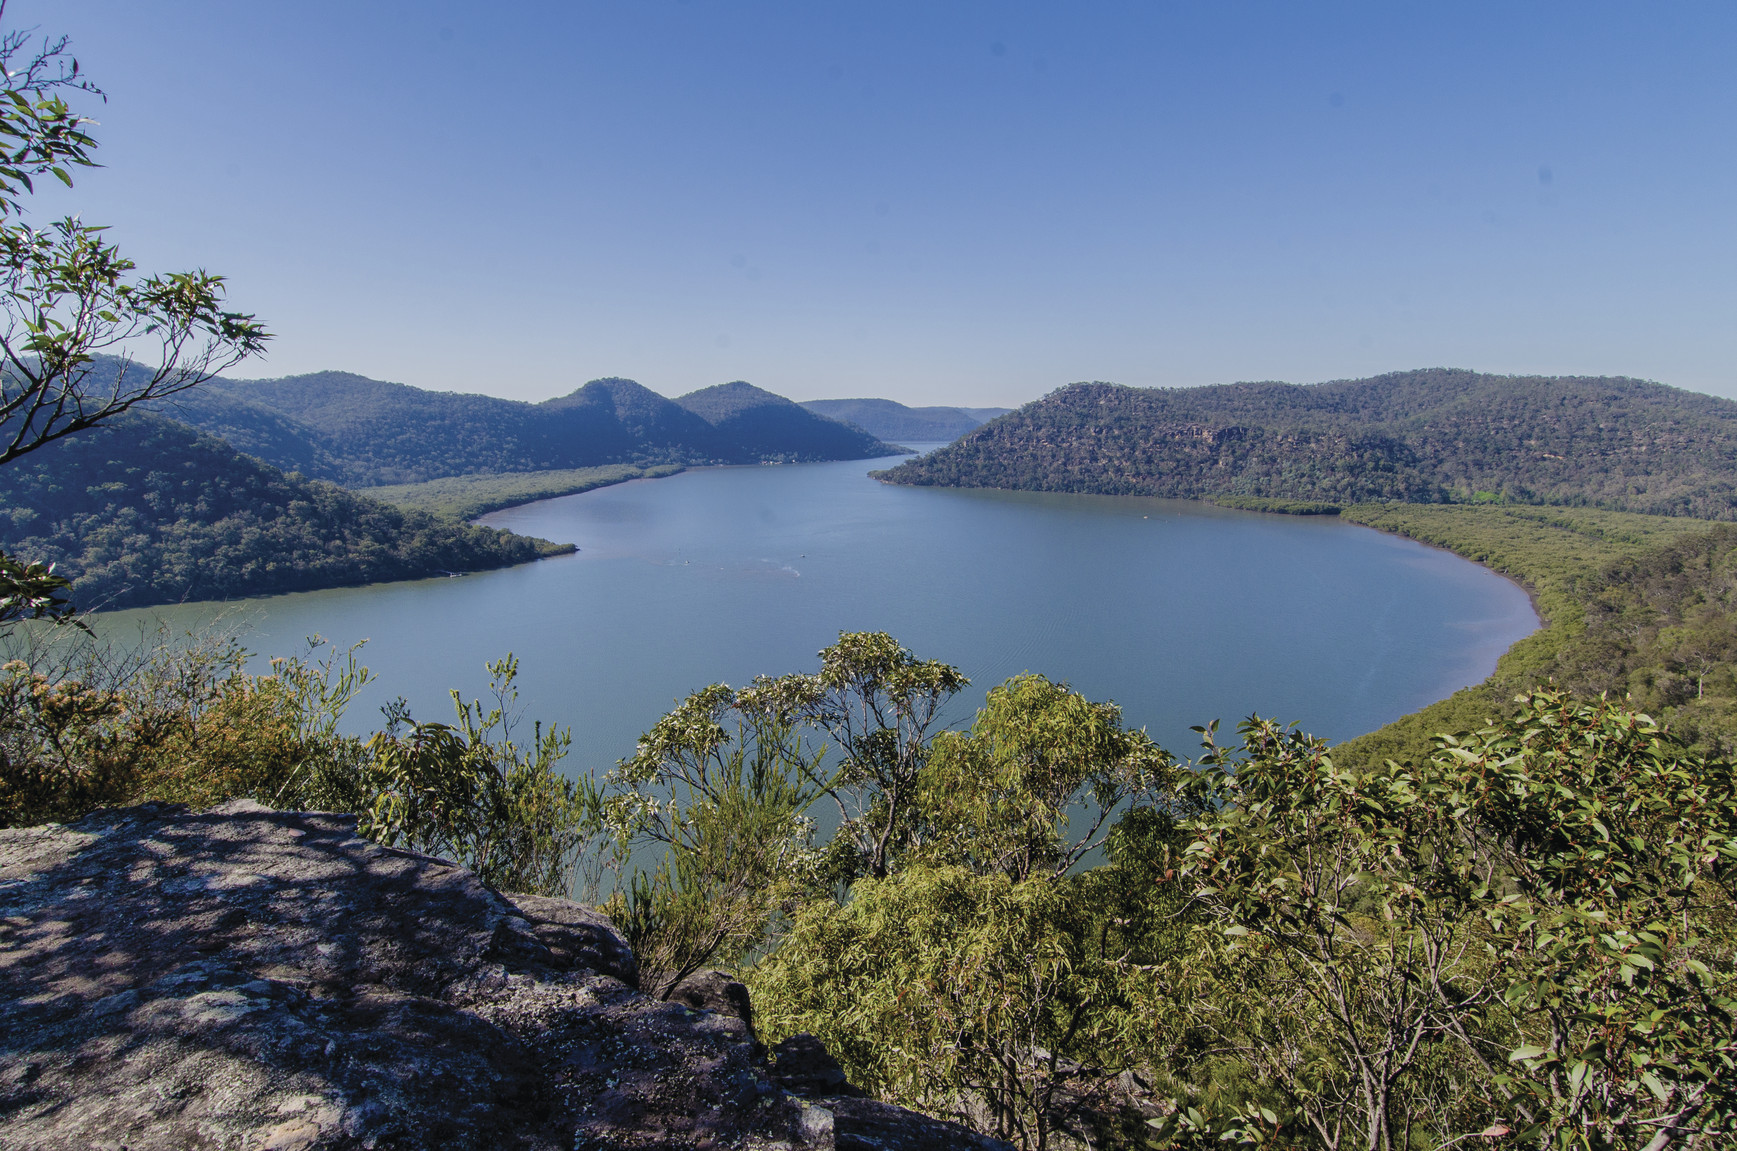 View of the Hawkesbury River from Marramarra National Park. Photo: John Spencer/DPIE